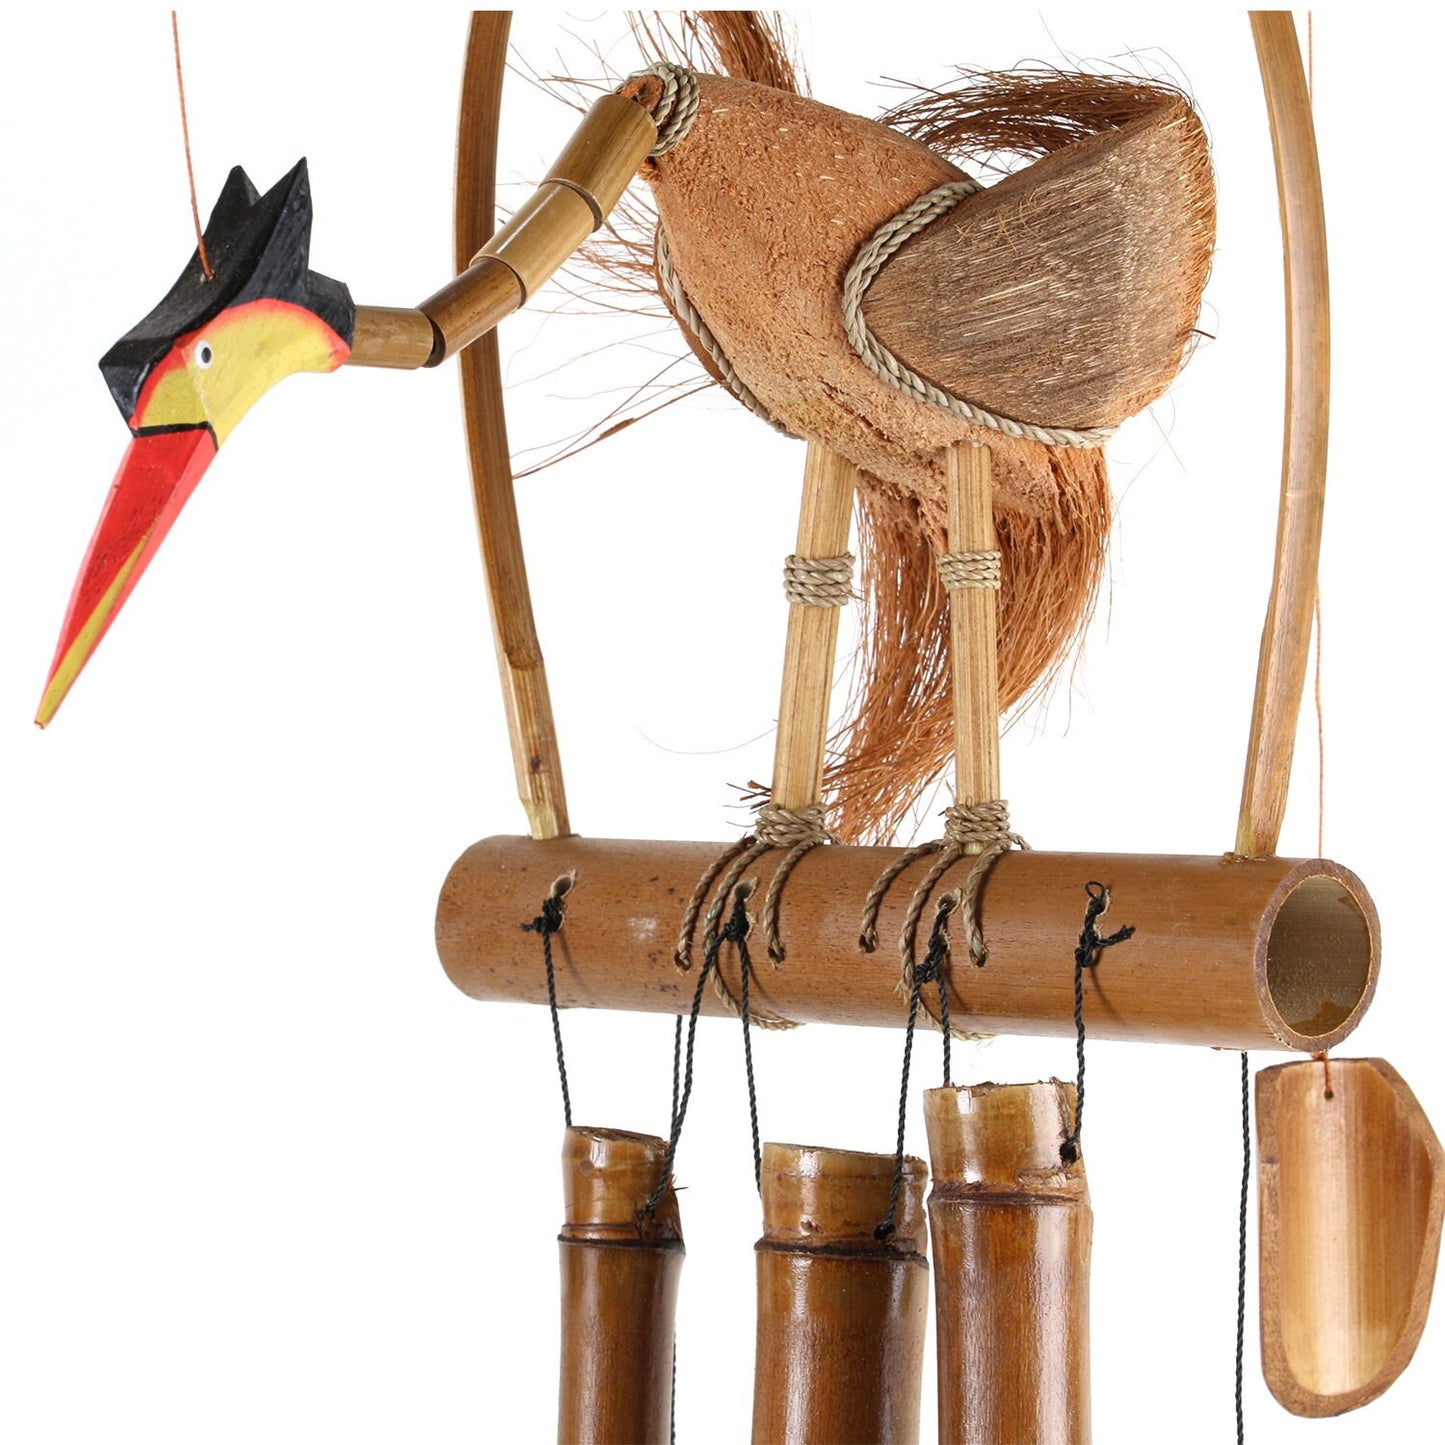 Wind chime mobile chime outdoor indoor paradise bird made of coconut and bamboo